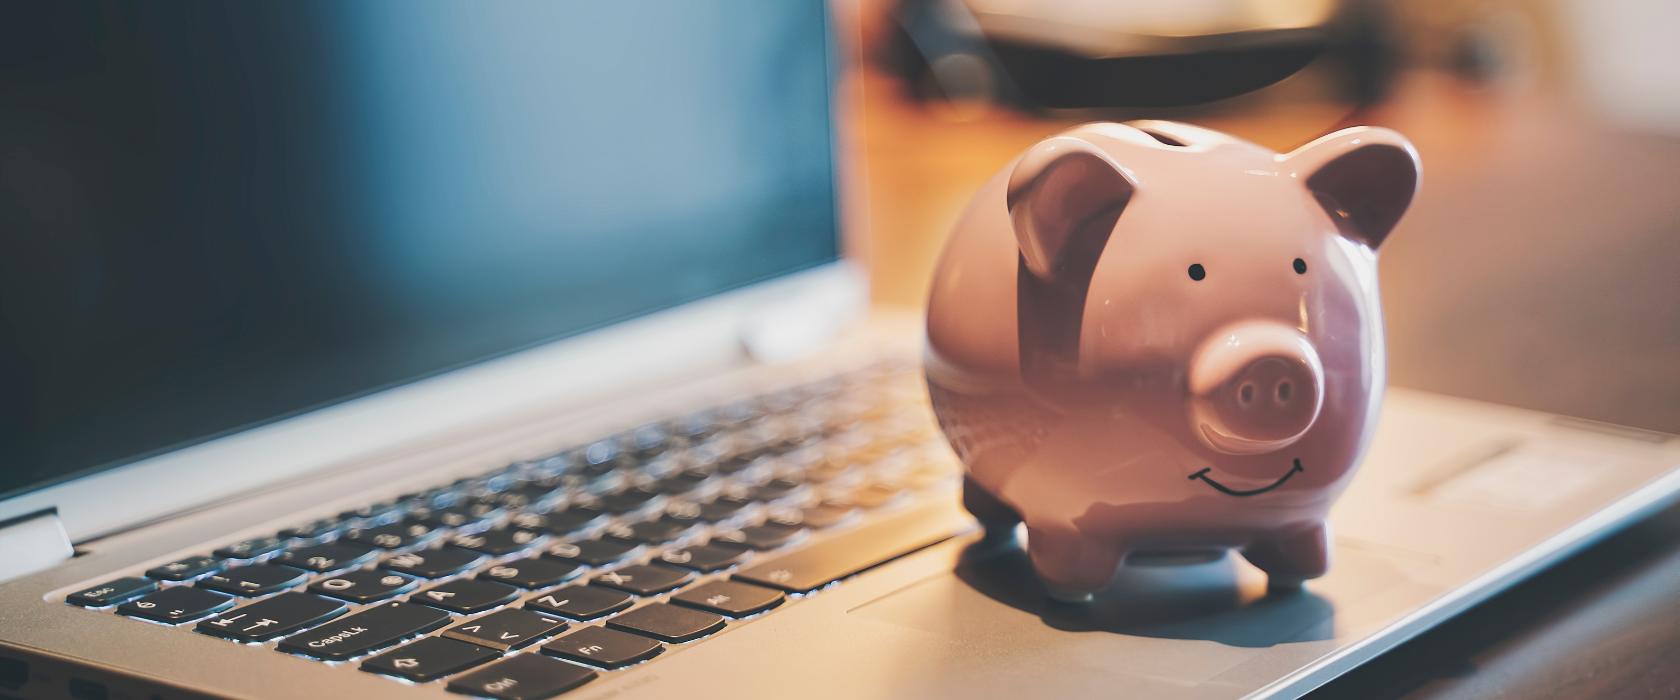 A happy pink piggy bank sitting on a laptop.